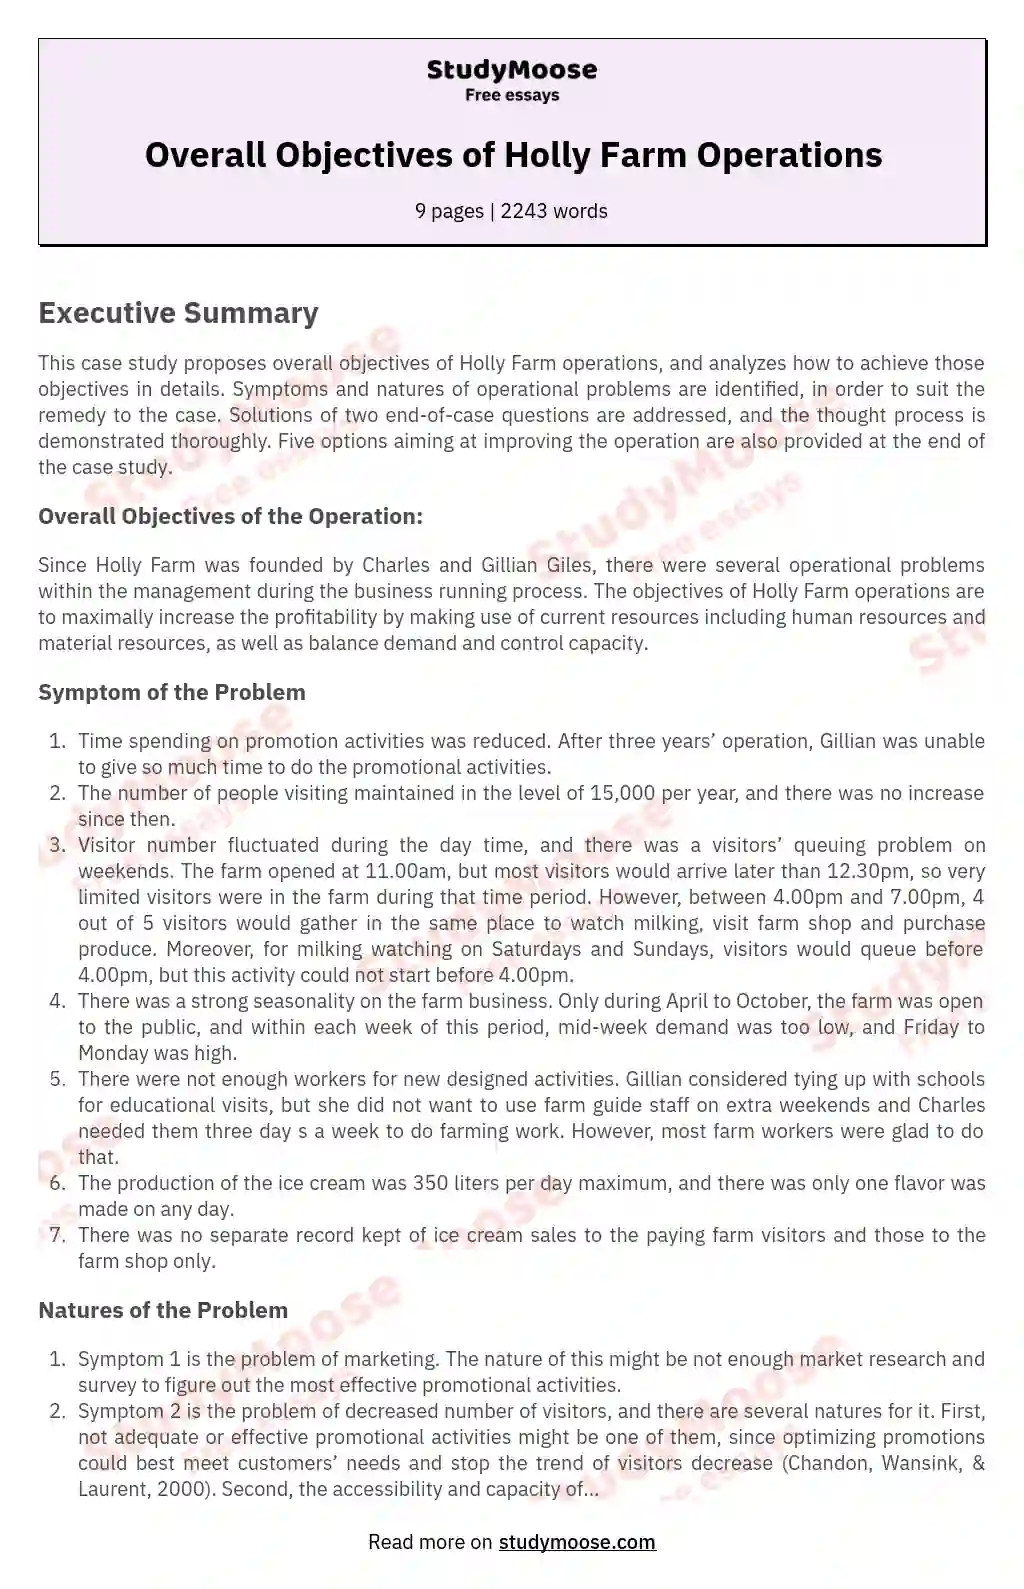 Overall Objectives of Holly Farm Operations essay